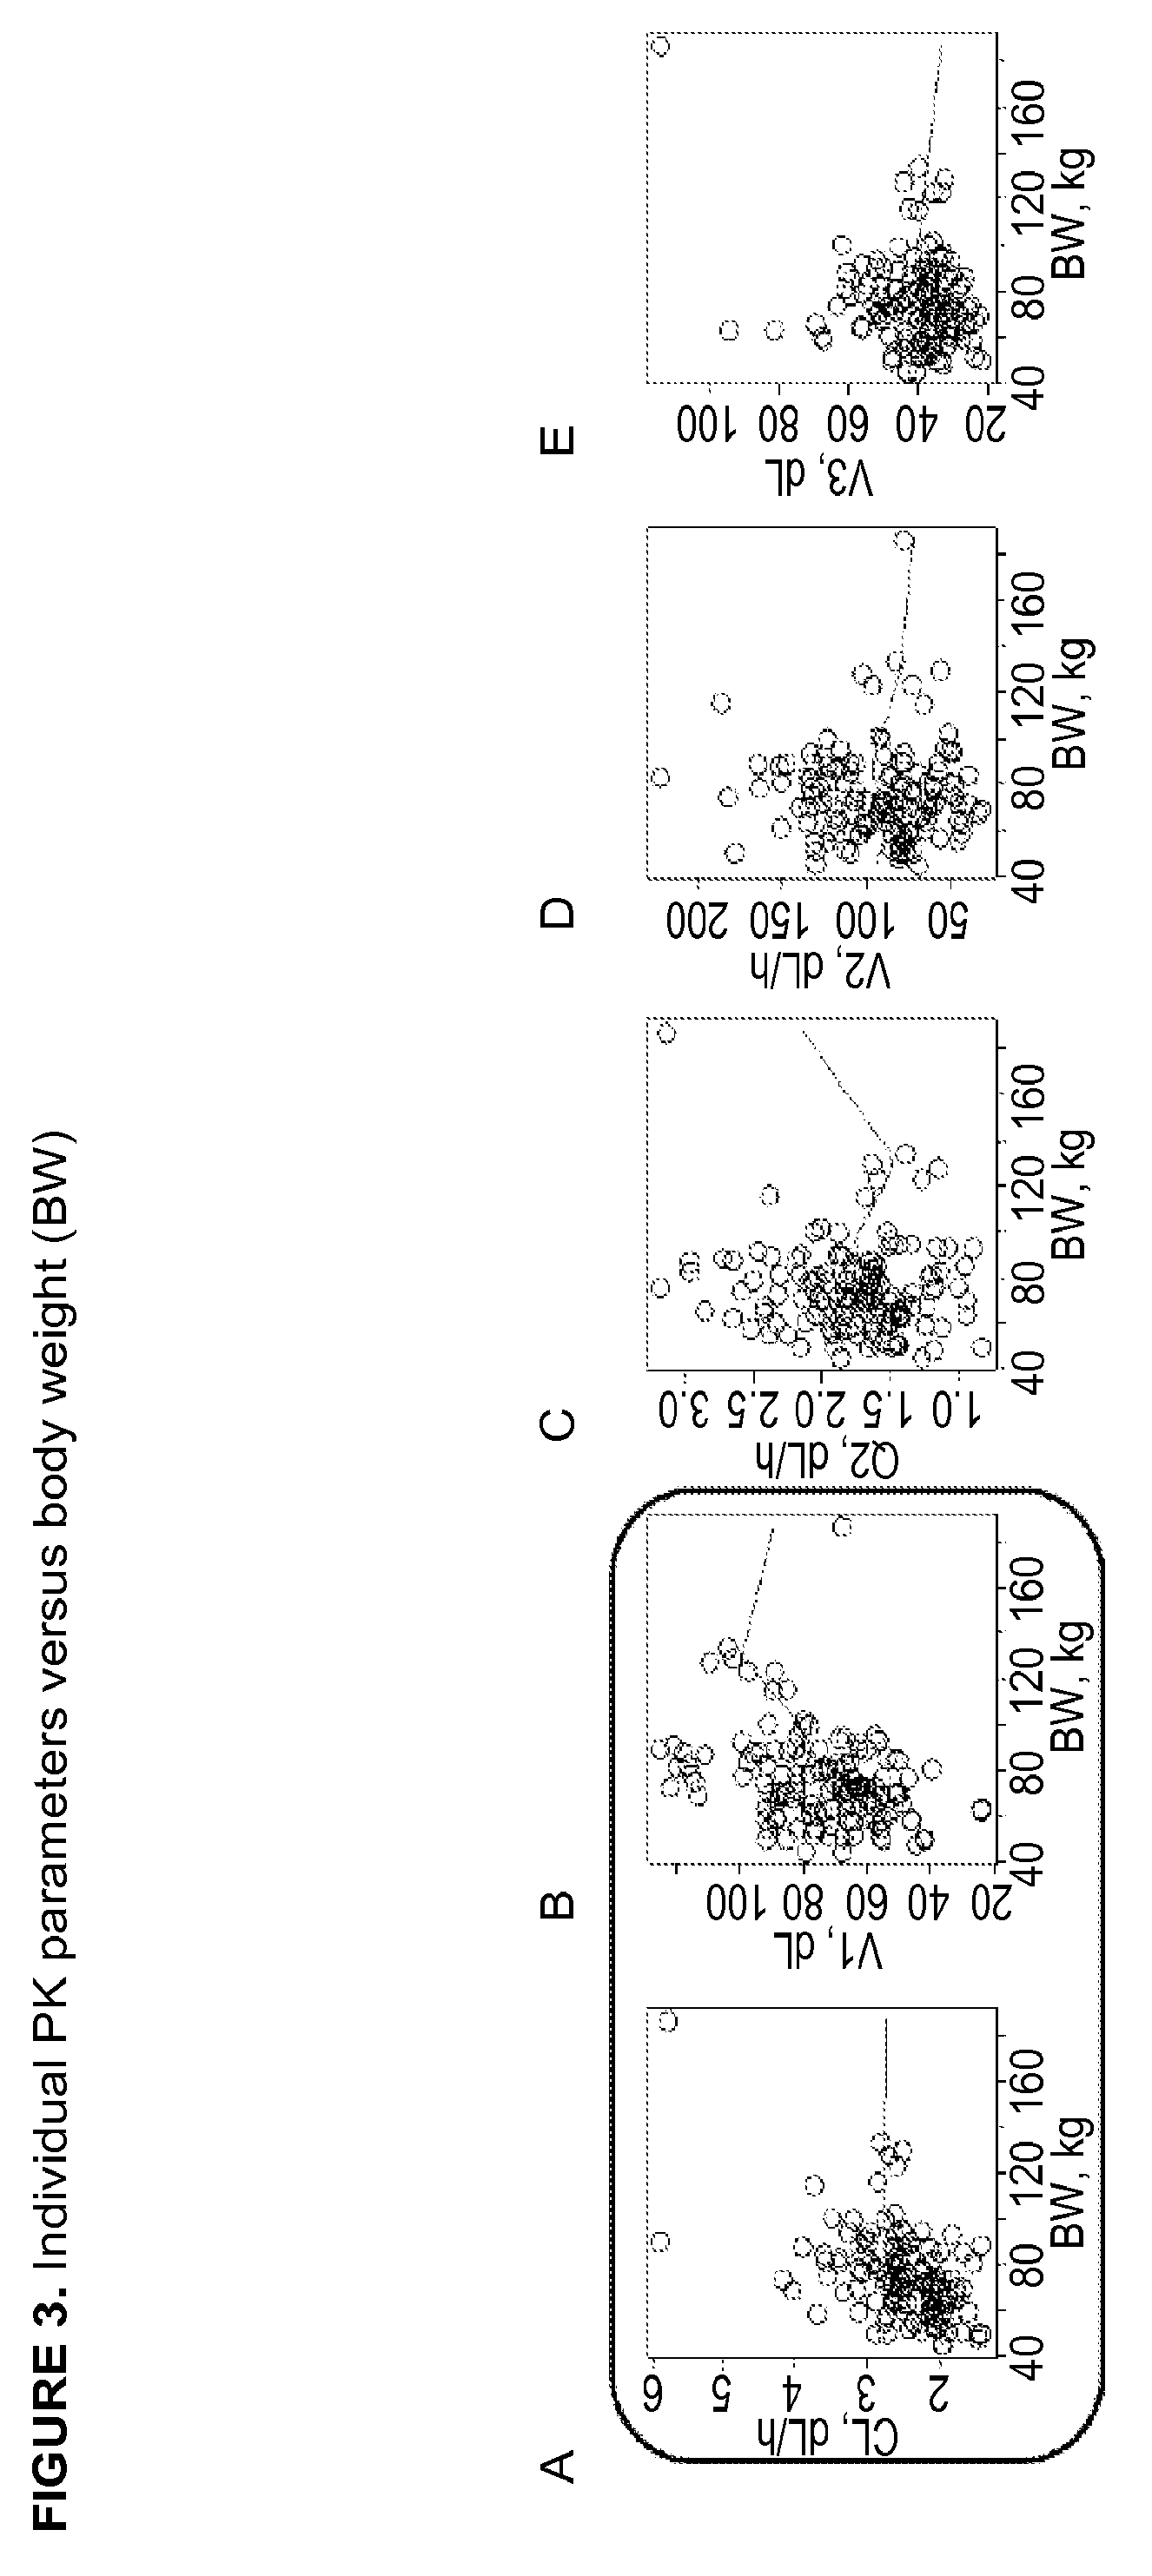 Methods of using a fixed dose of a clotting factor